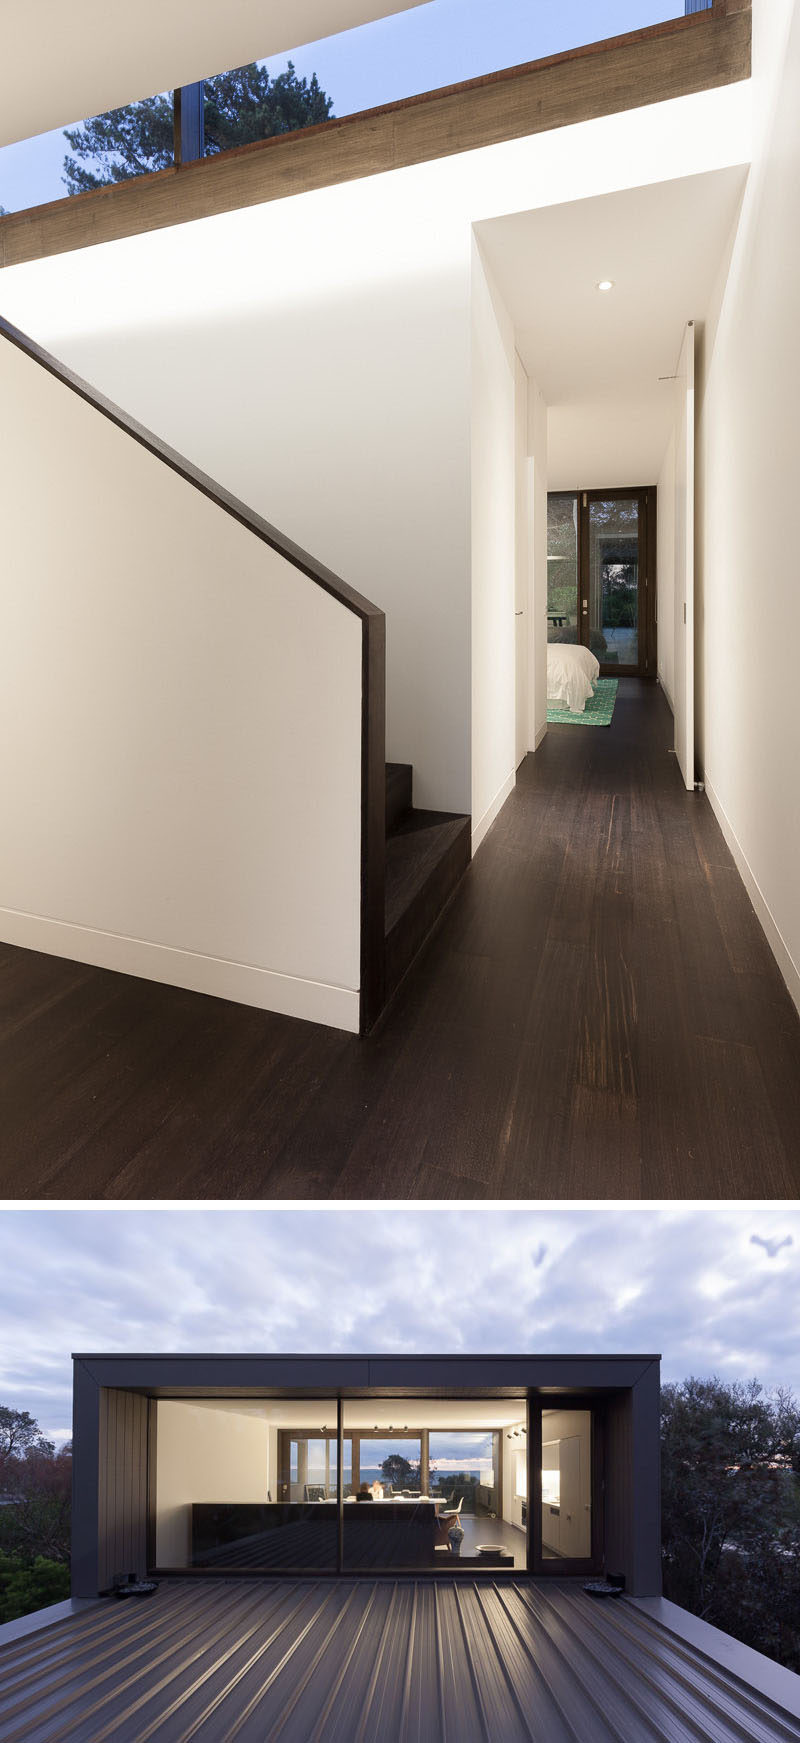 Dark hardwood flooring is featured throughout this modern house contrasts the white walls. Heading upstairs, the common areas of the home are revealed. At the top of the stairs, there's the option of going into the living area, or accessing the roof through a glass door.